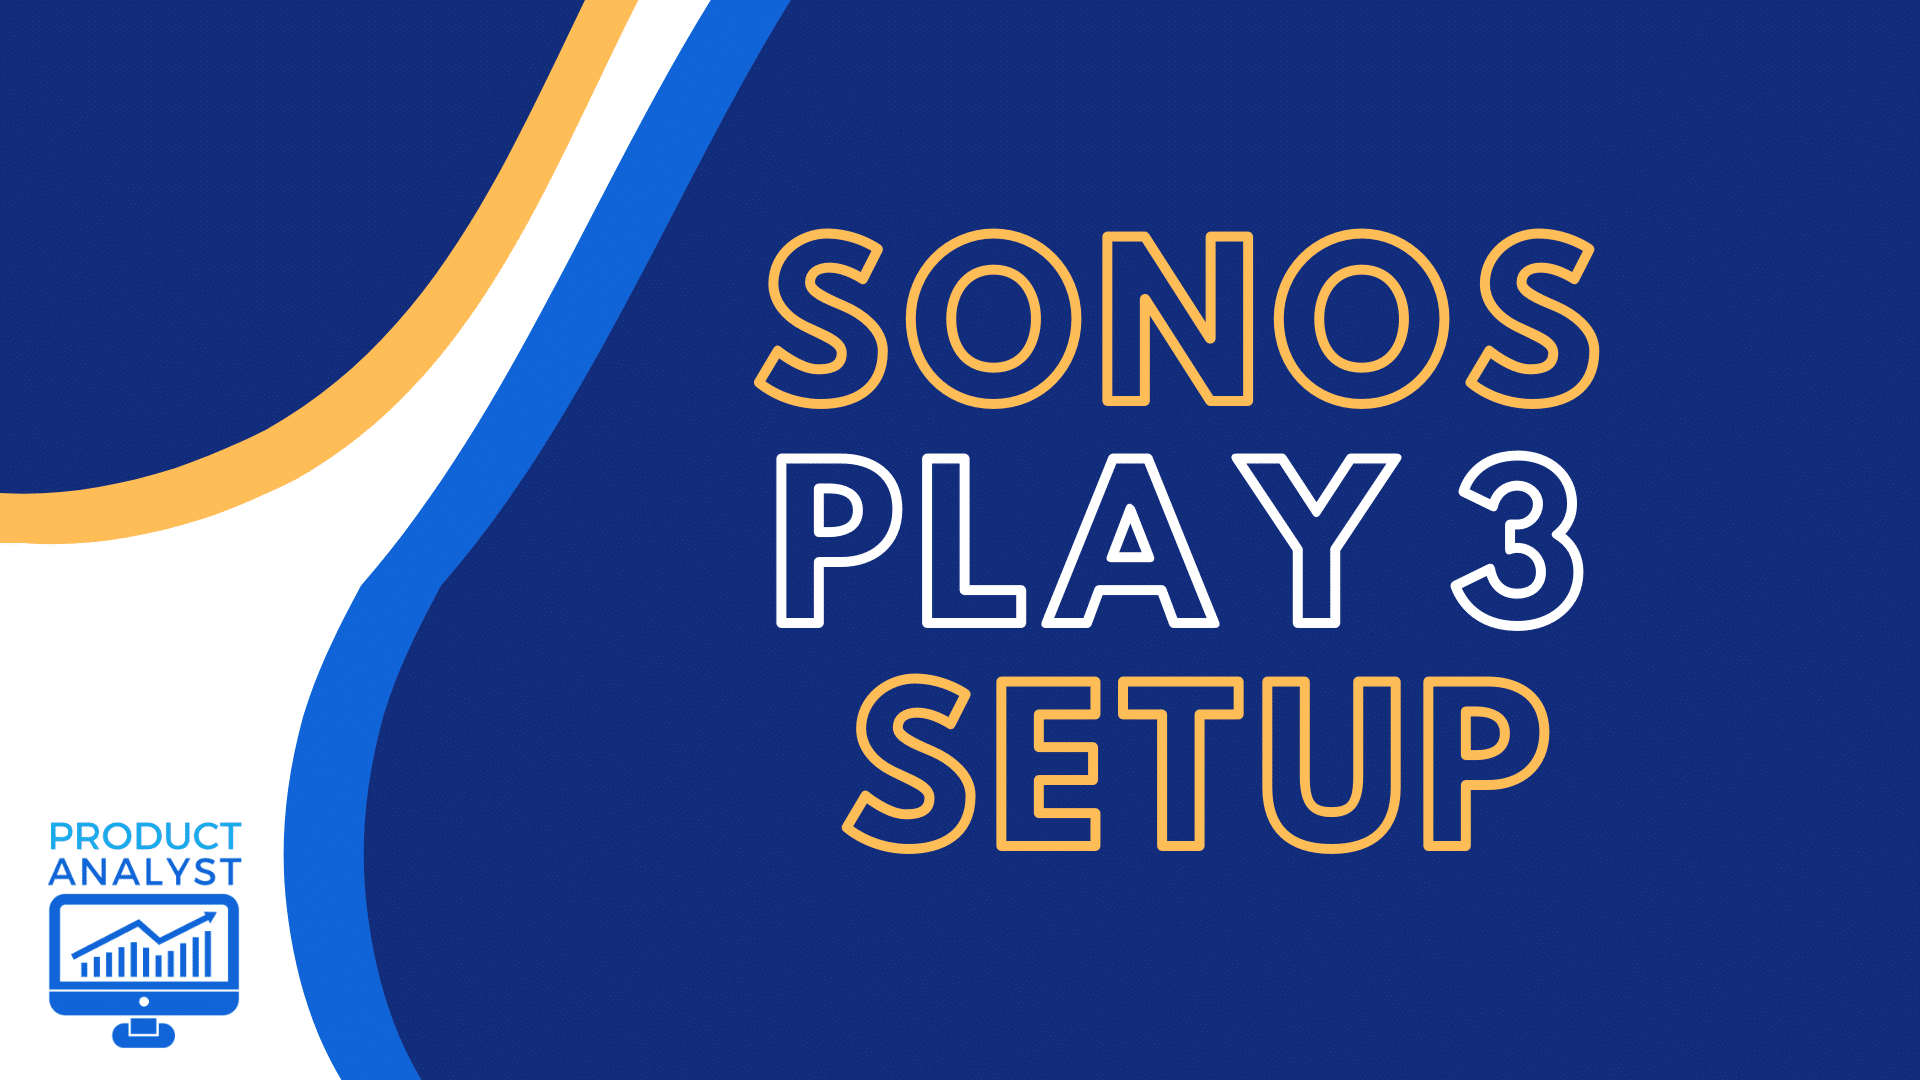 sig selv spiralformet Løse Sonos Play 3 Setup: How to Sync to Devices [2023]